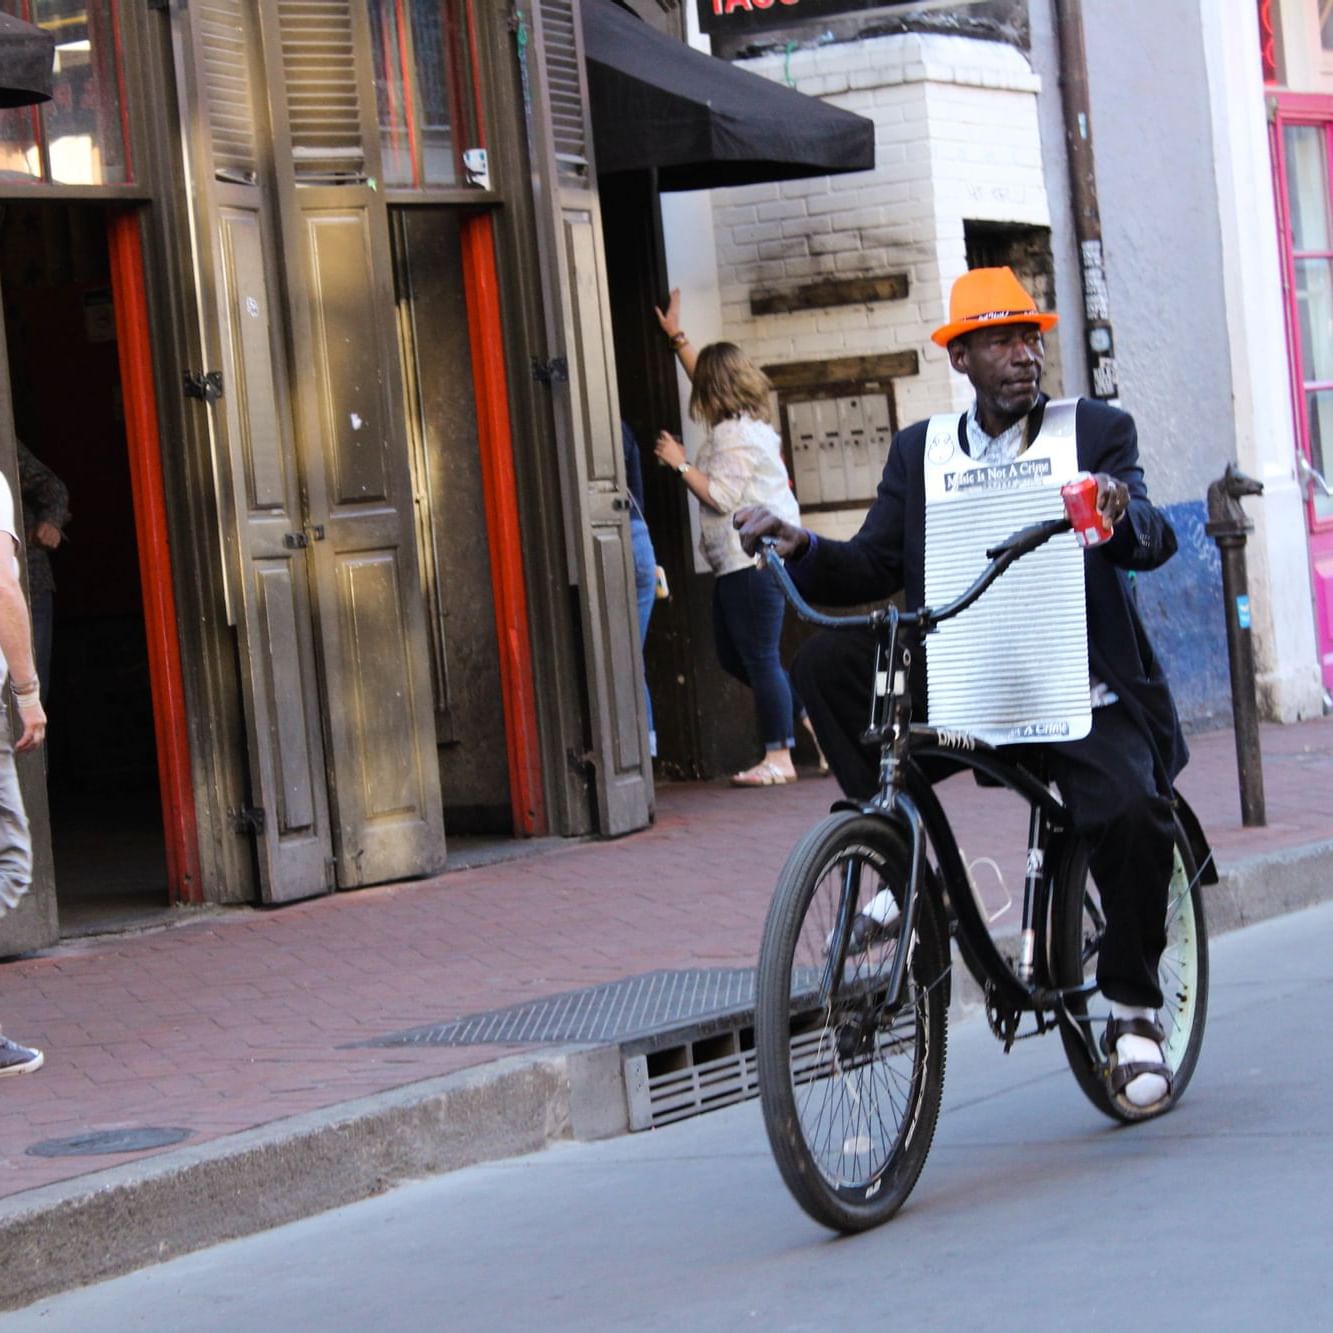 A man riding a bicycle in a street near La Galerie Hotel